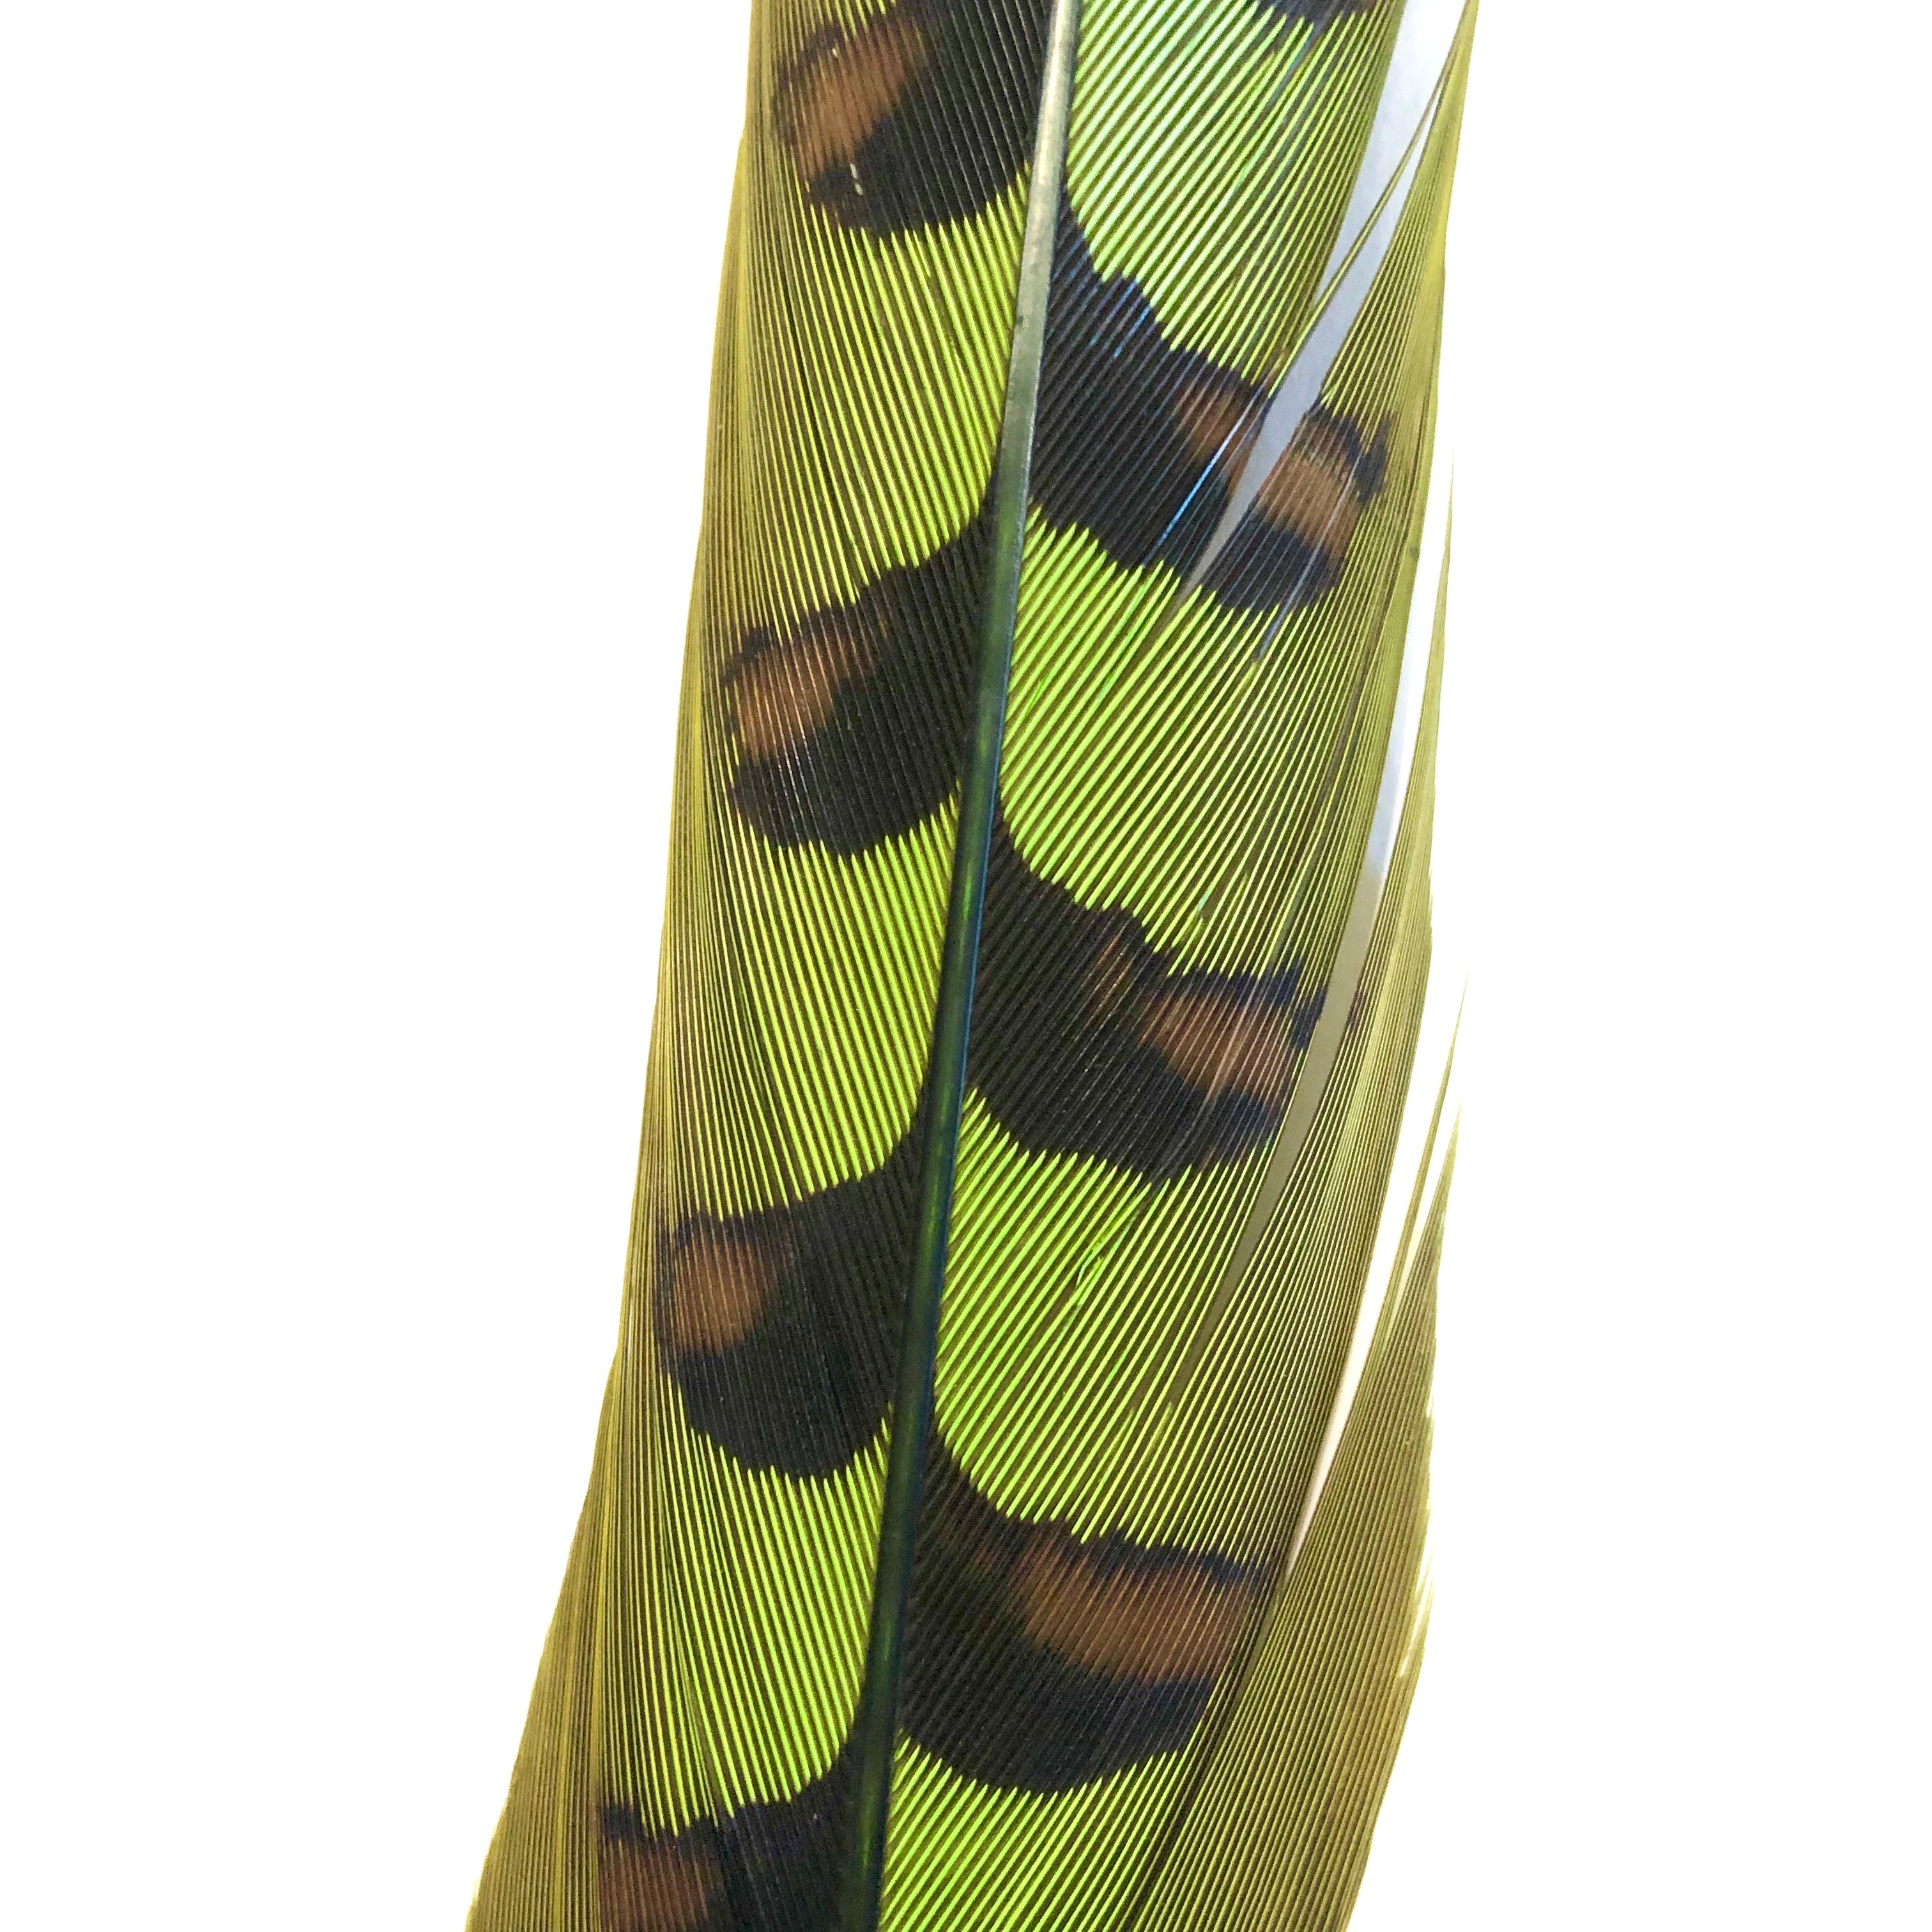 50" to 55" Reeves Pheasant Tail Feather - Lime Green